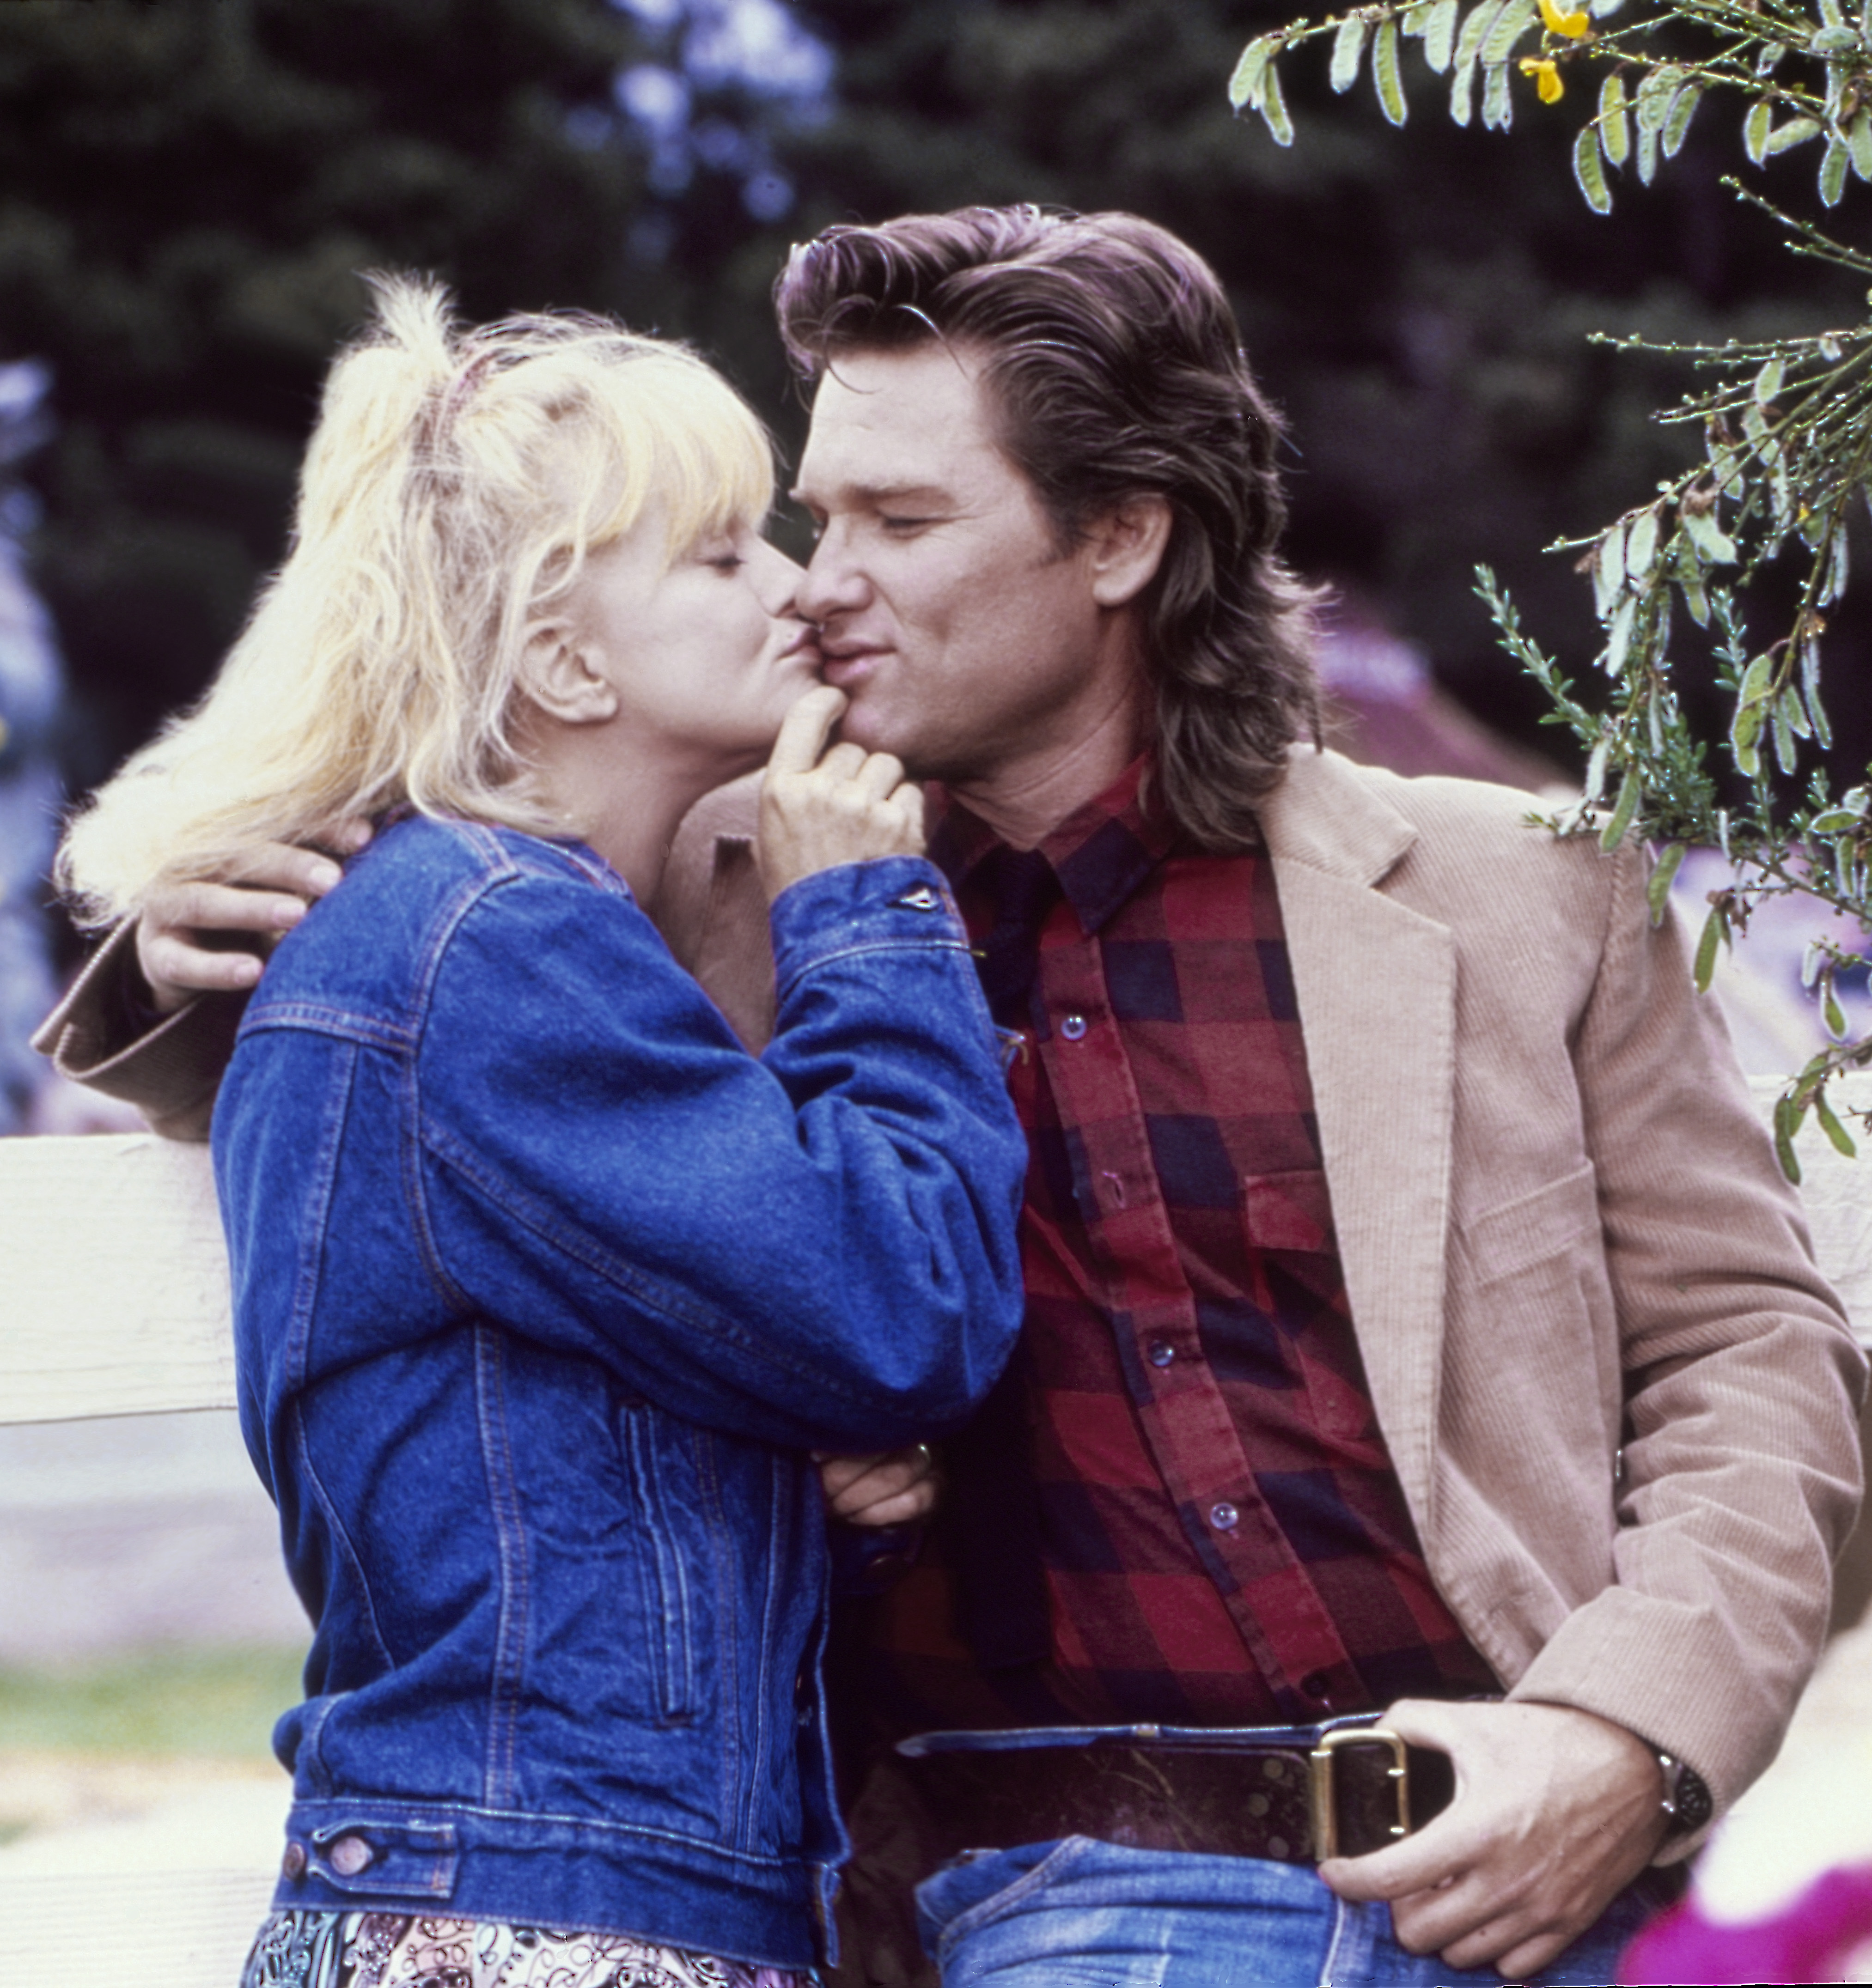 Goldie Hawn and Kurt Russell in a portrait session for their movie "Overboard" in Fort Bragg, 1987 | Source: Getty Images